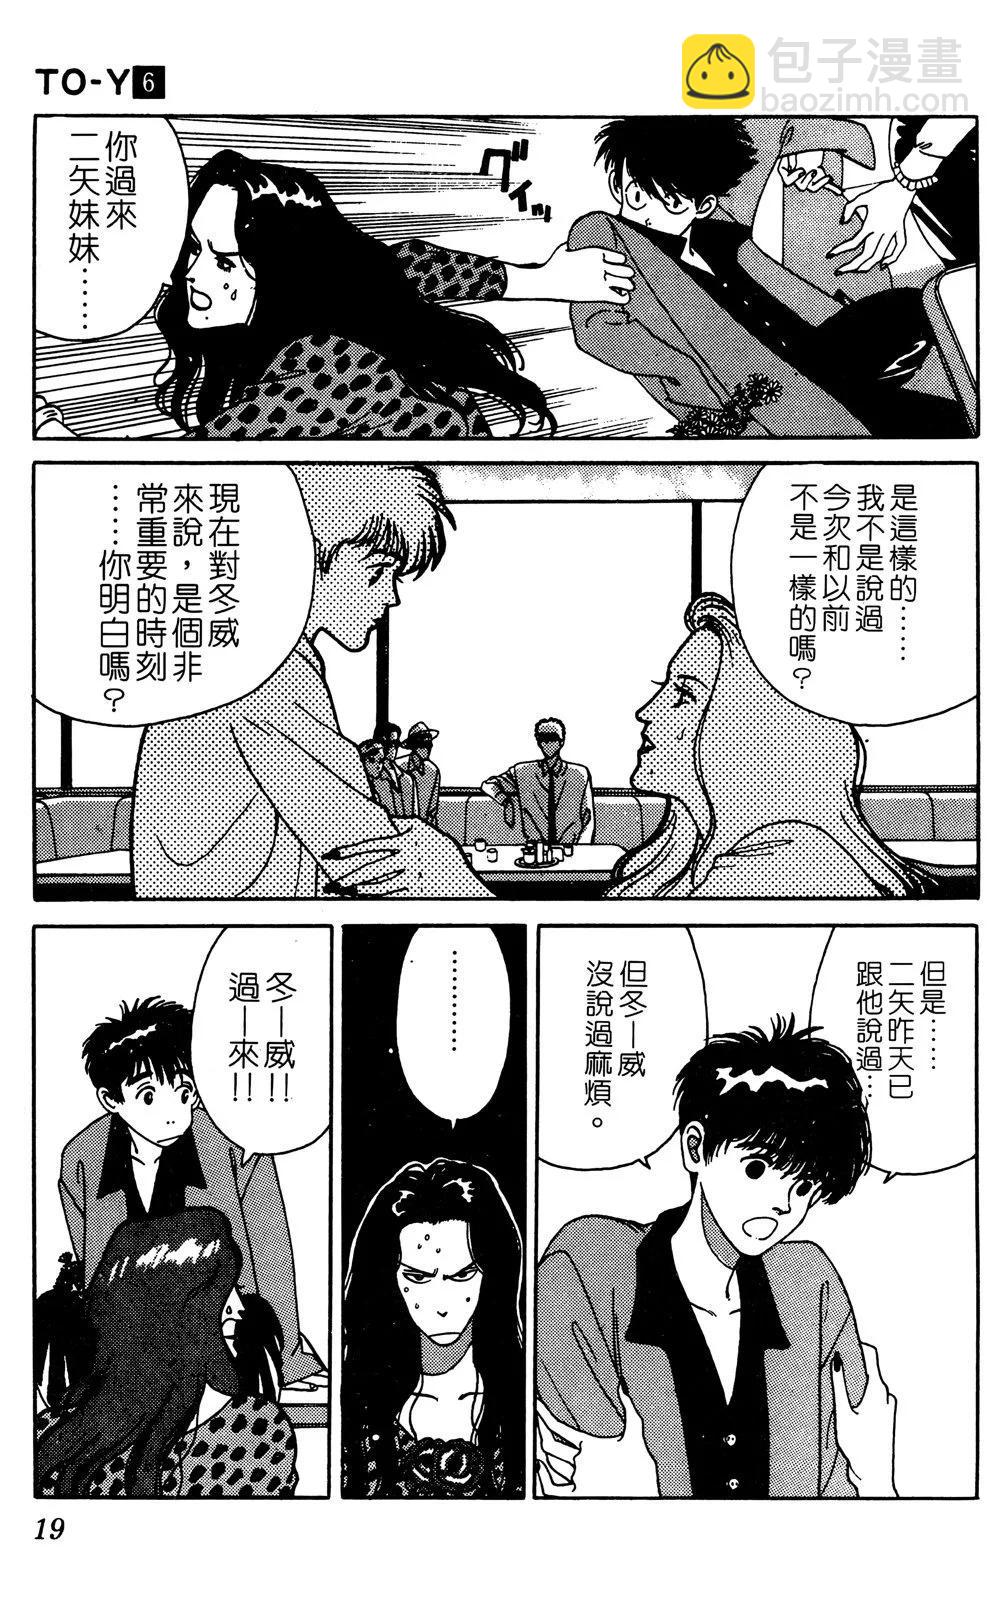 TO-Y - 第06卷(1/4) - 6